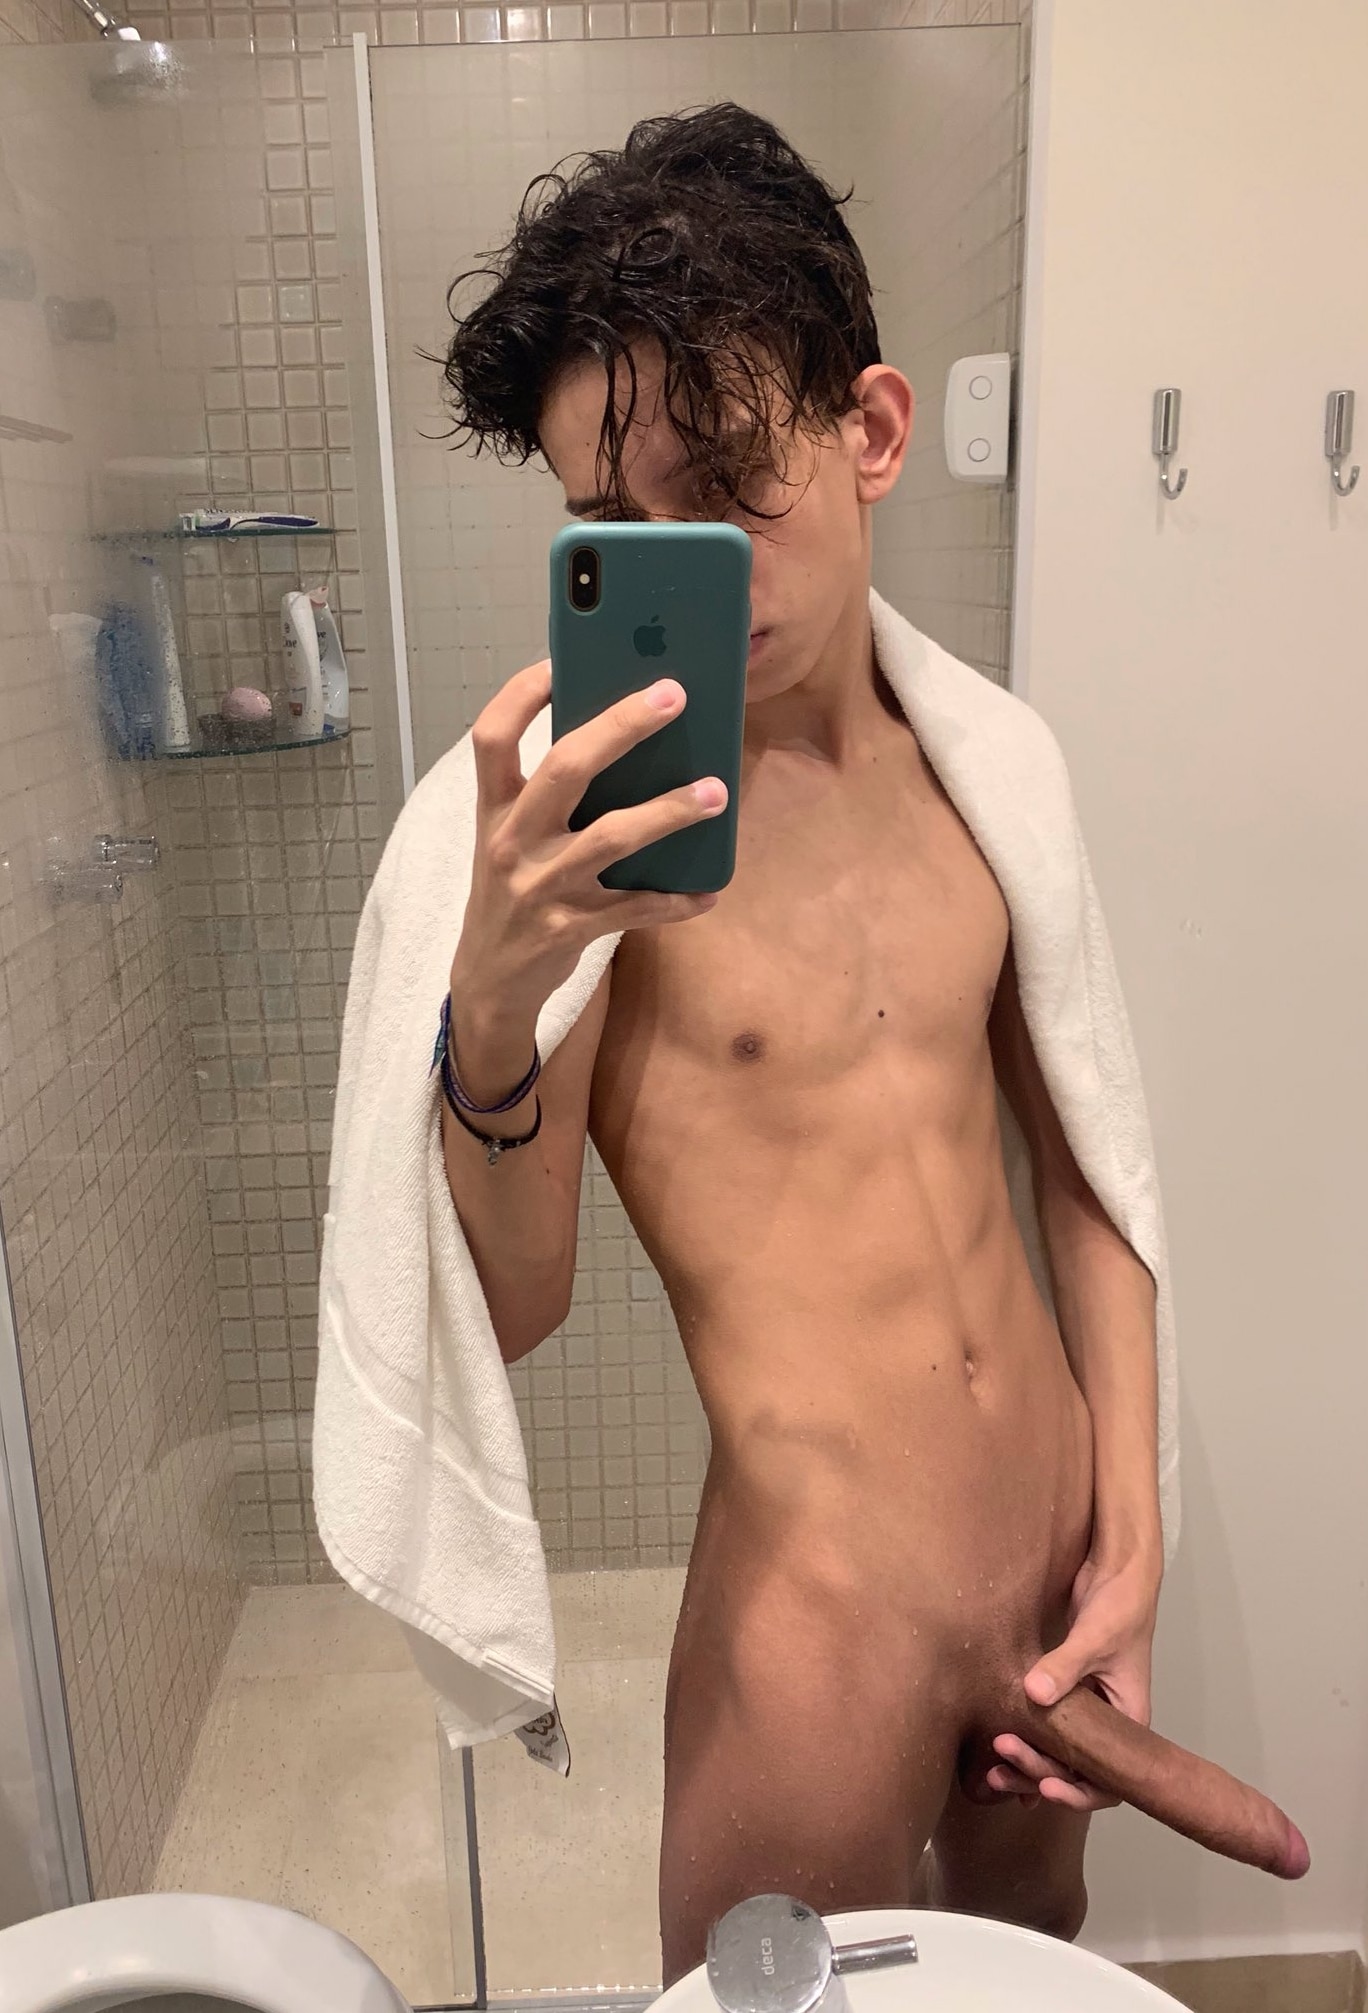 Twink with a long shaved cock